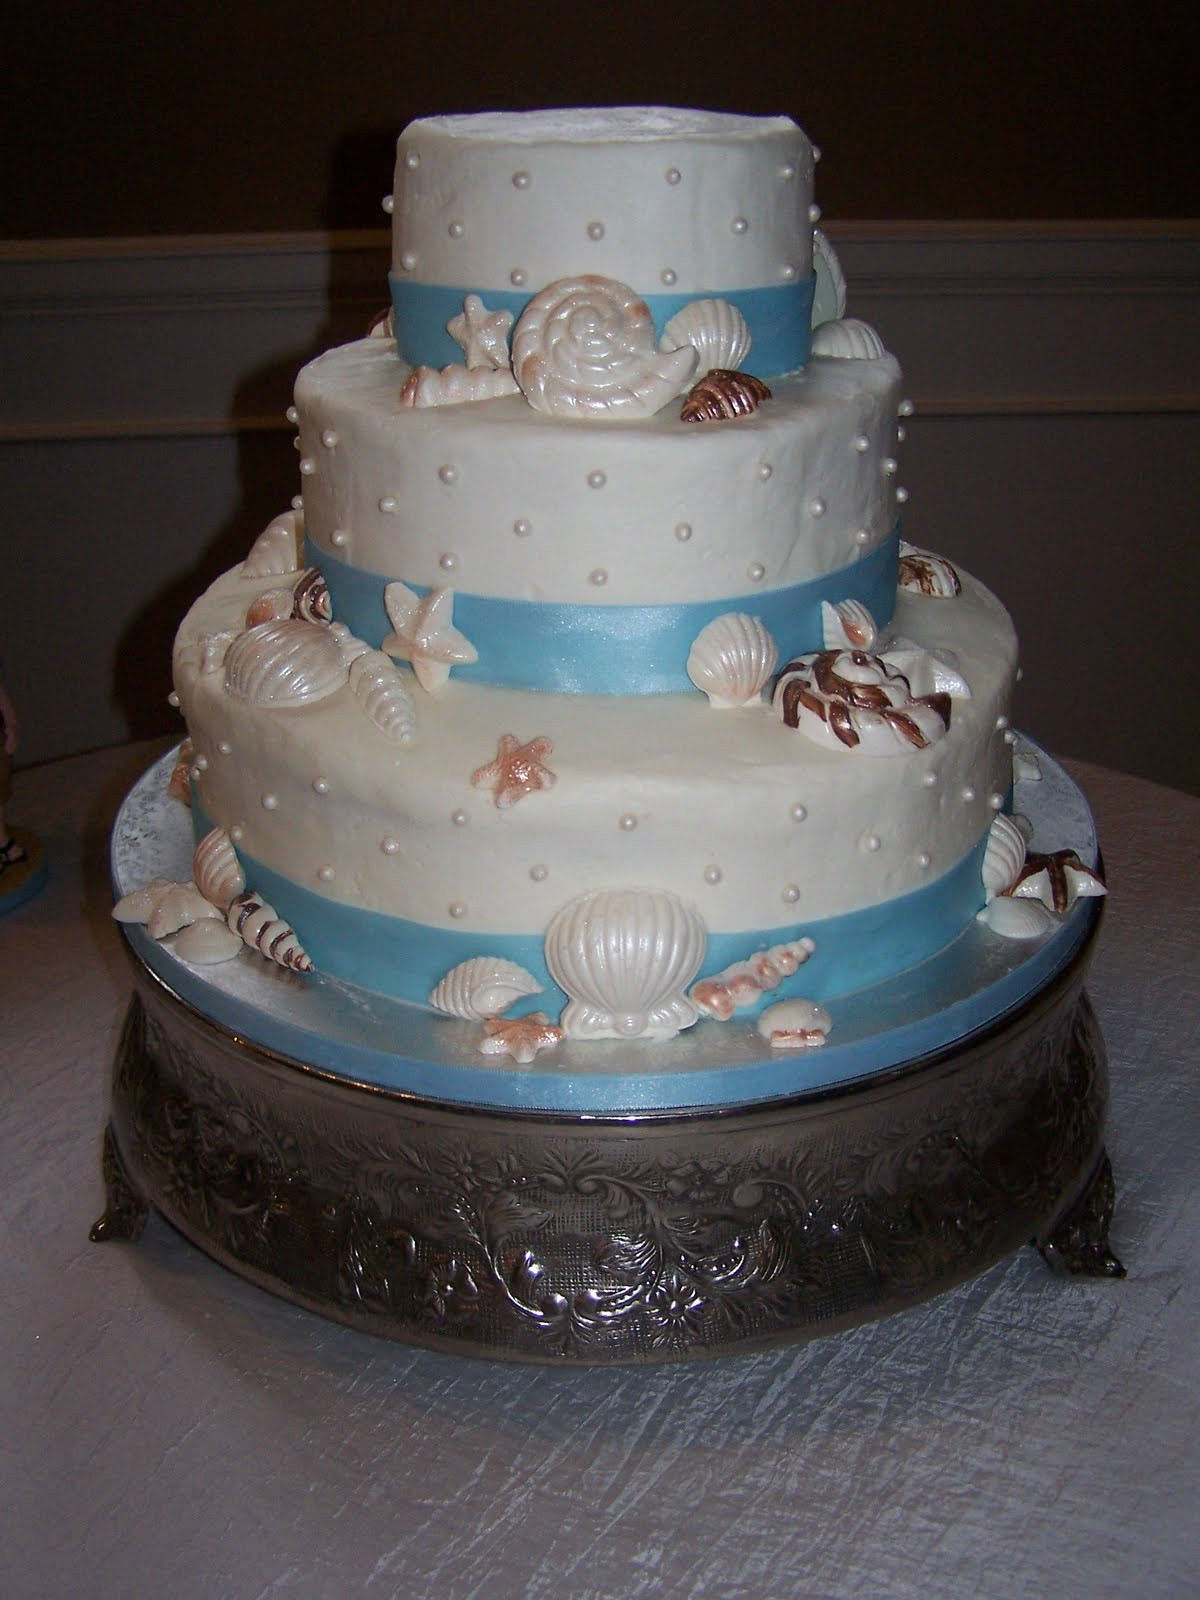 Beach Themed Wedding Cakes Pictures
 Delores s blog Beach Themed Wedding Cakes